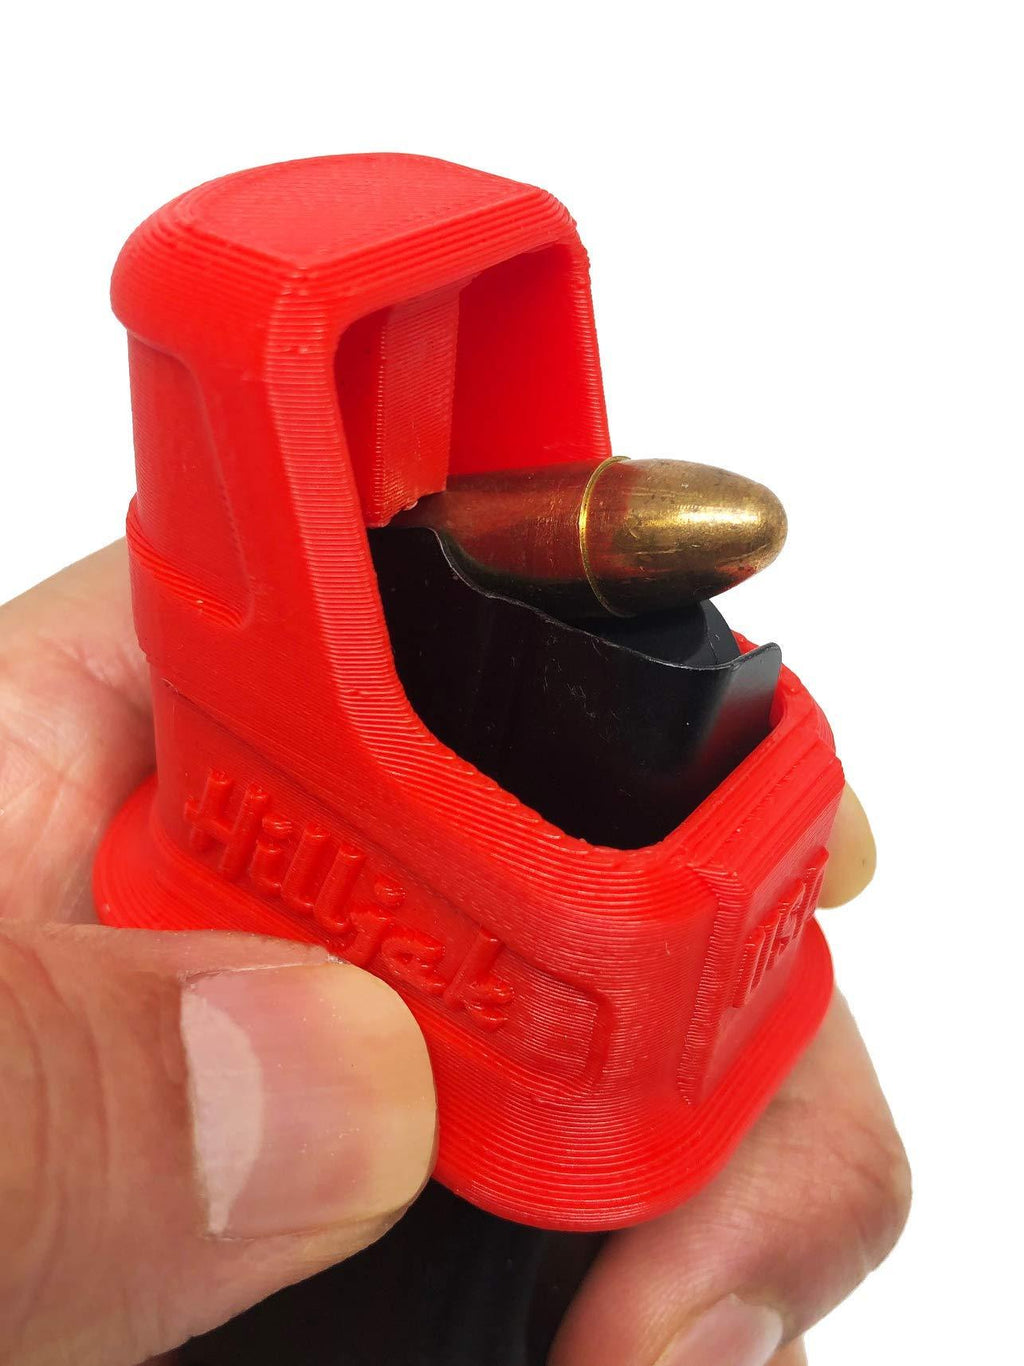 [AUSTRALIA] - Hilljak Speed Loader Compatible with Sig Sauer P365, Springfield Hellcat Double-Stack 9mm - Red 